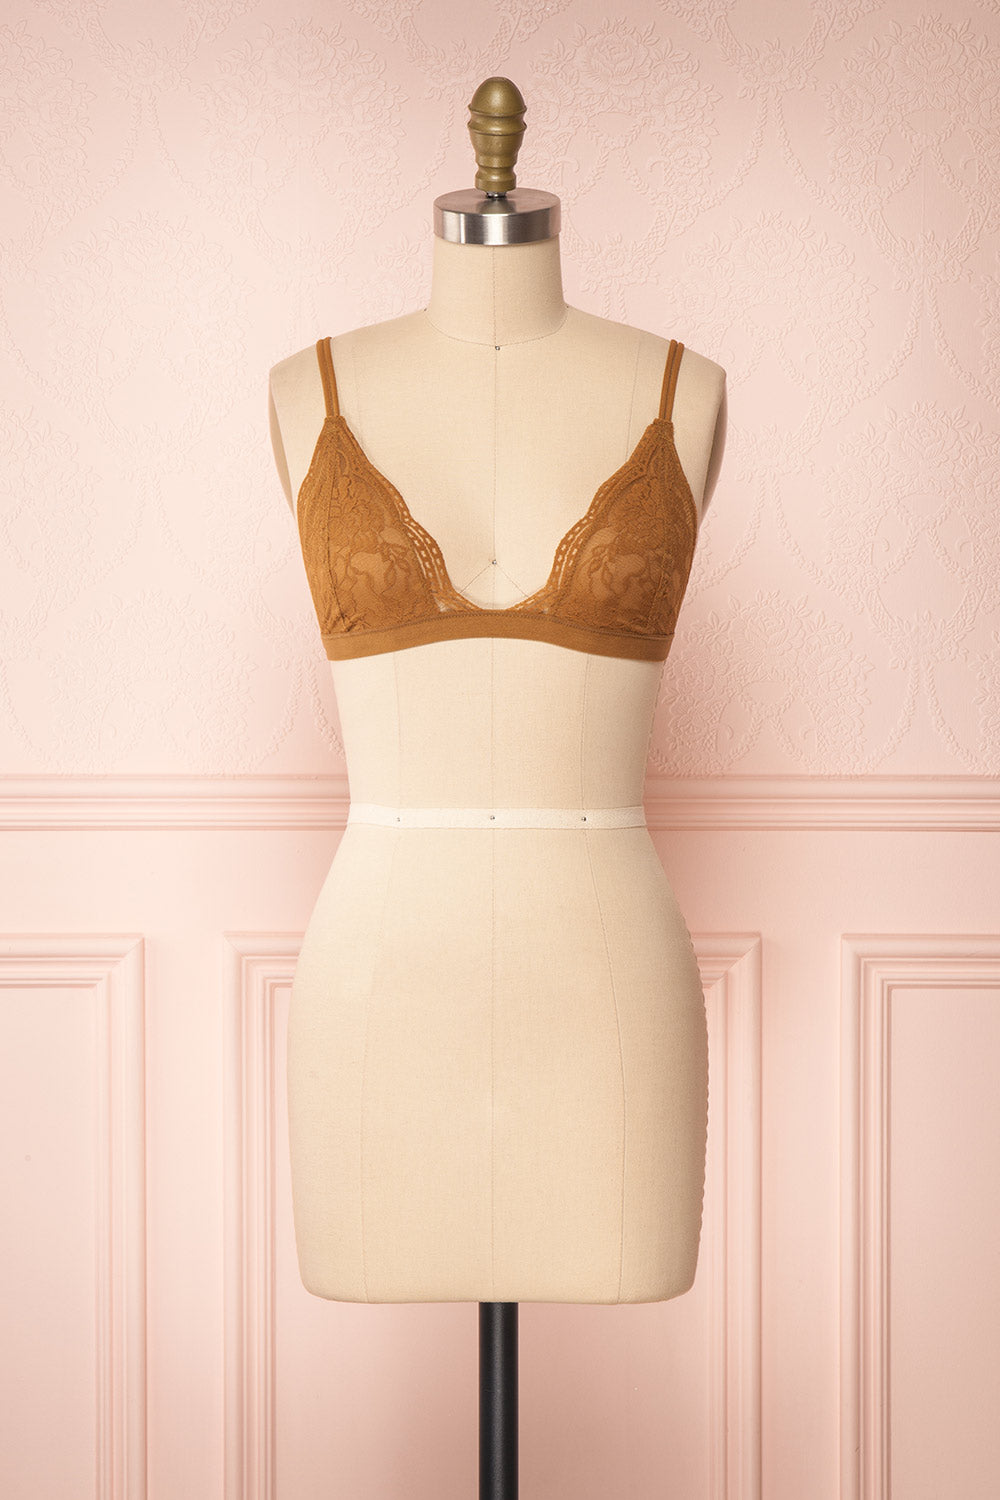 Ati Muscade Brown Lace Bralette front view | Boutique 1861